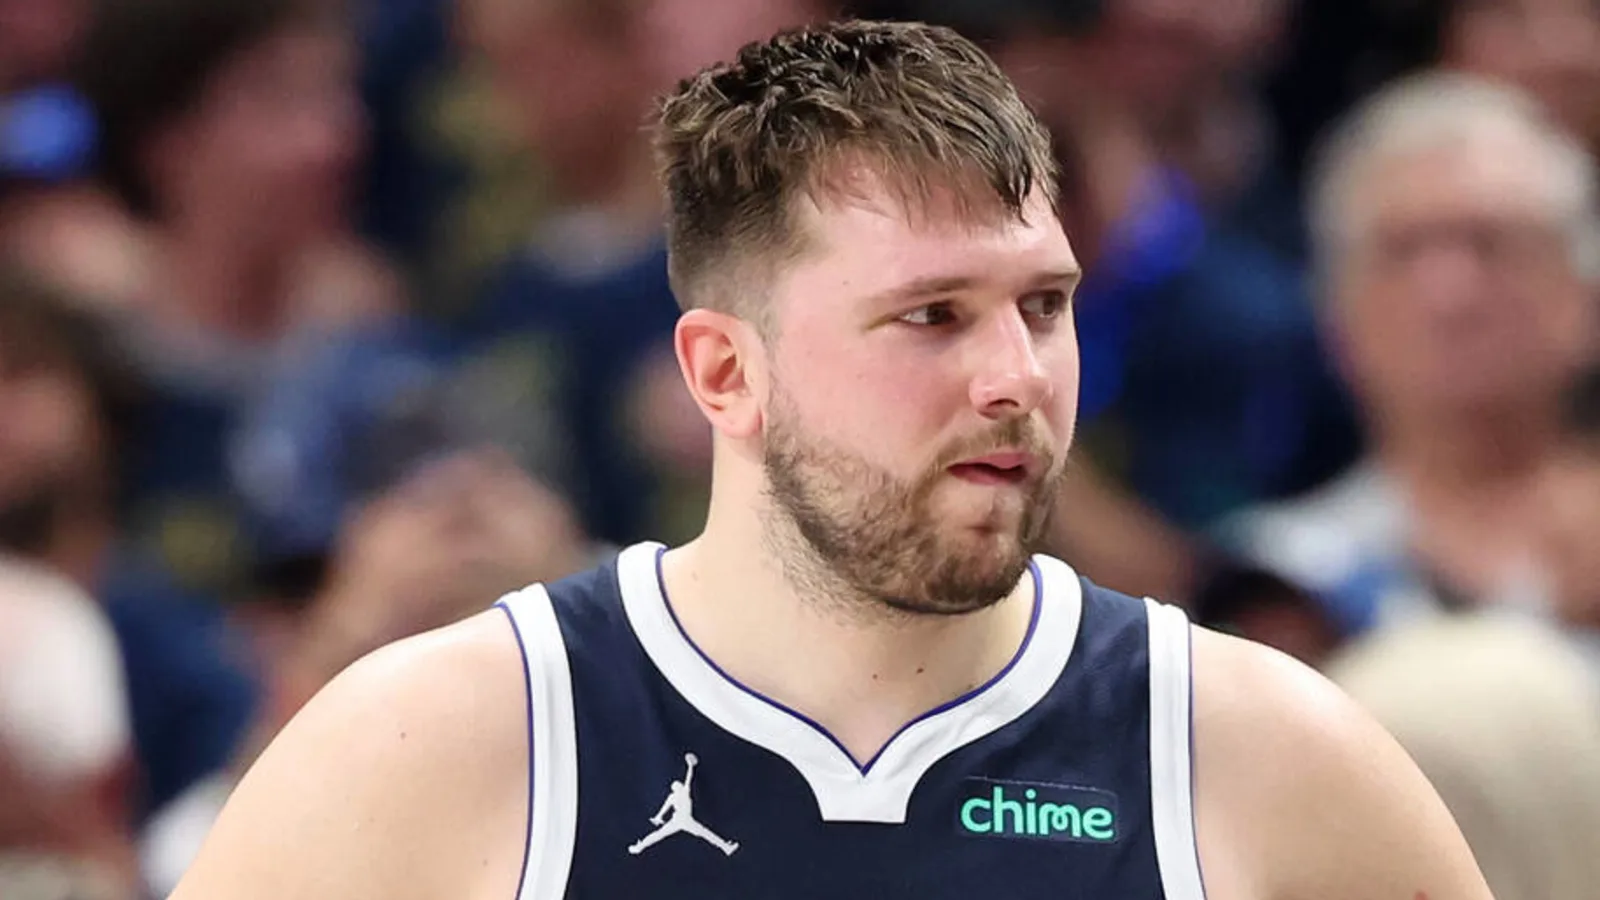 TRENDING NBA REPORT: LUKA DONCIC comes out as gay in a social media post…